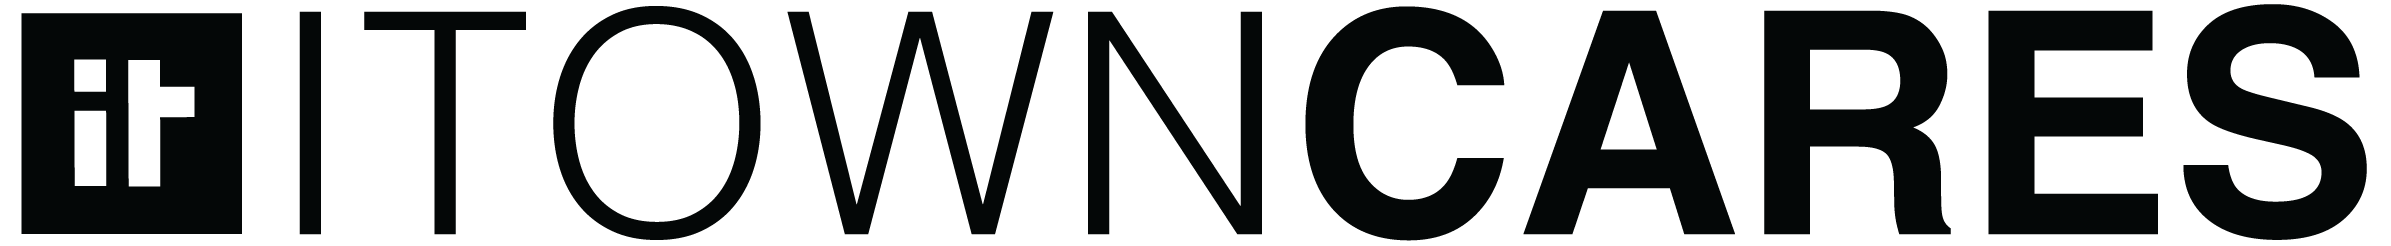 Logo-ITOWN_Cares-OneLine-Black.png